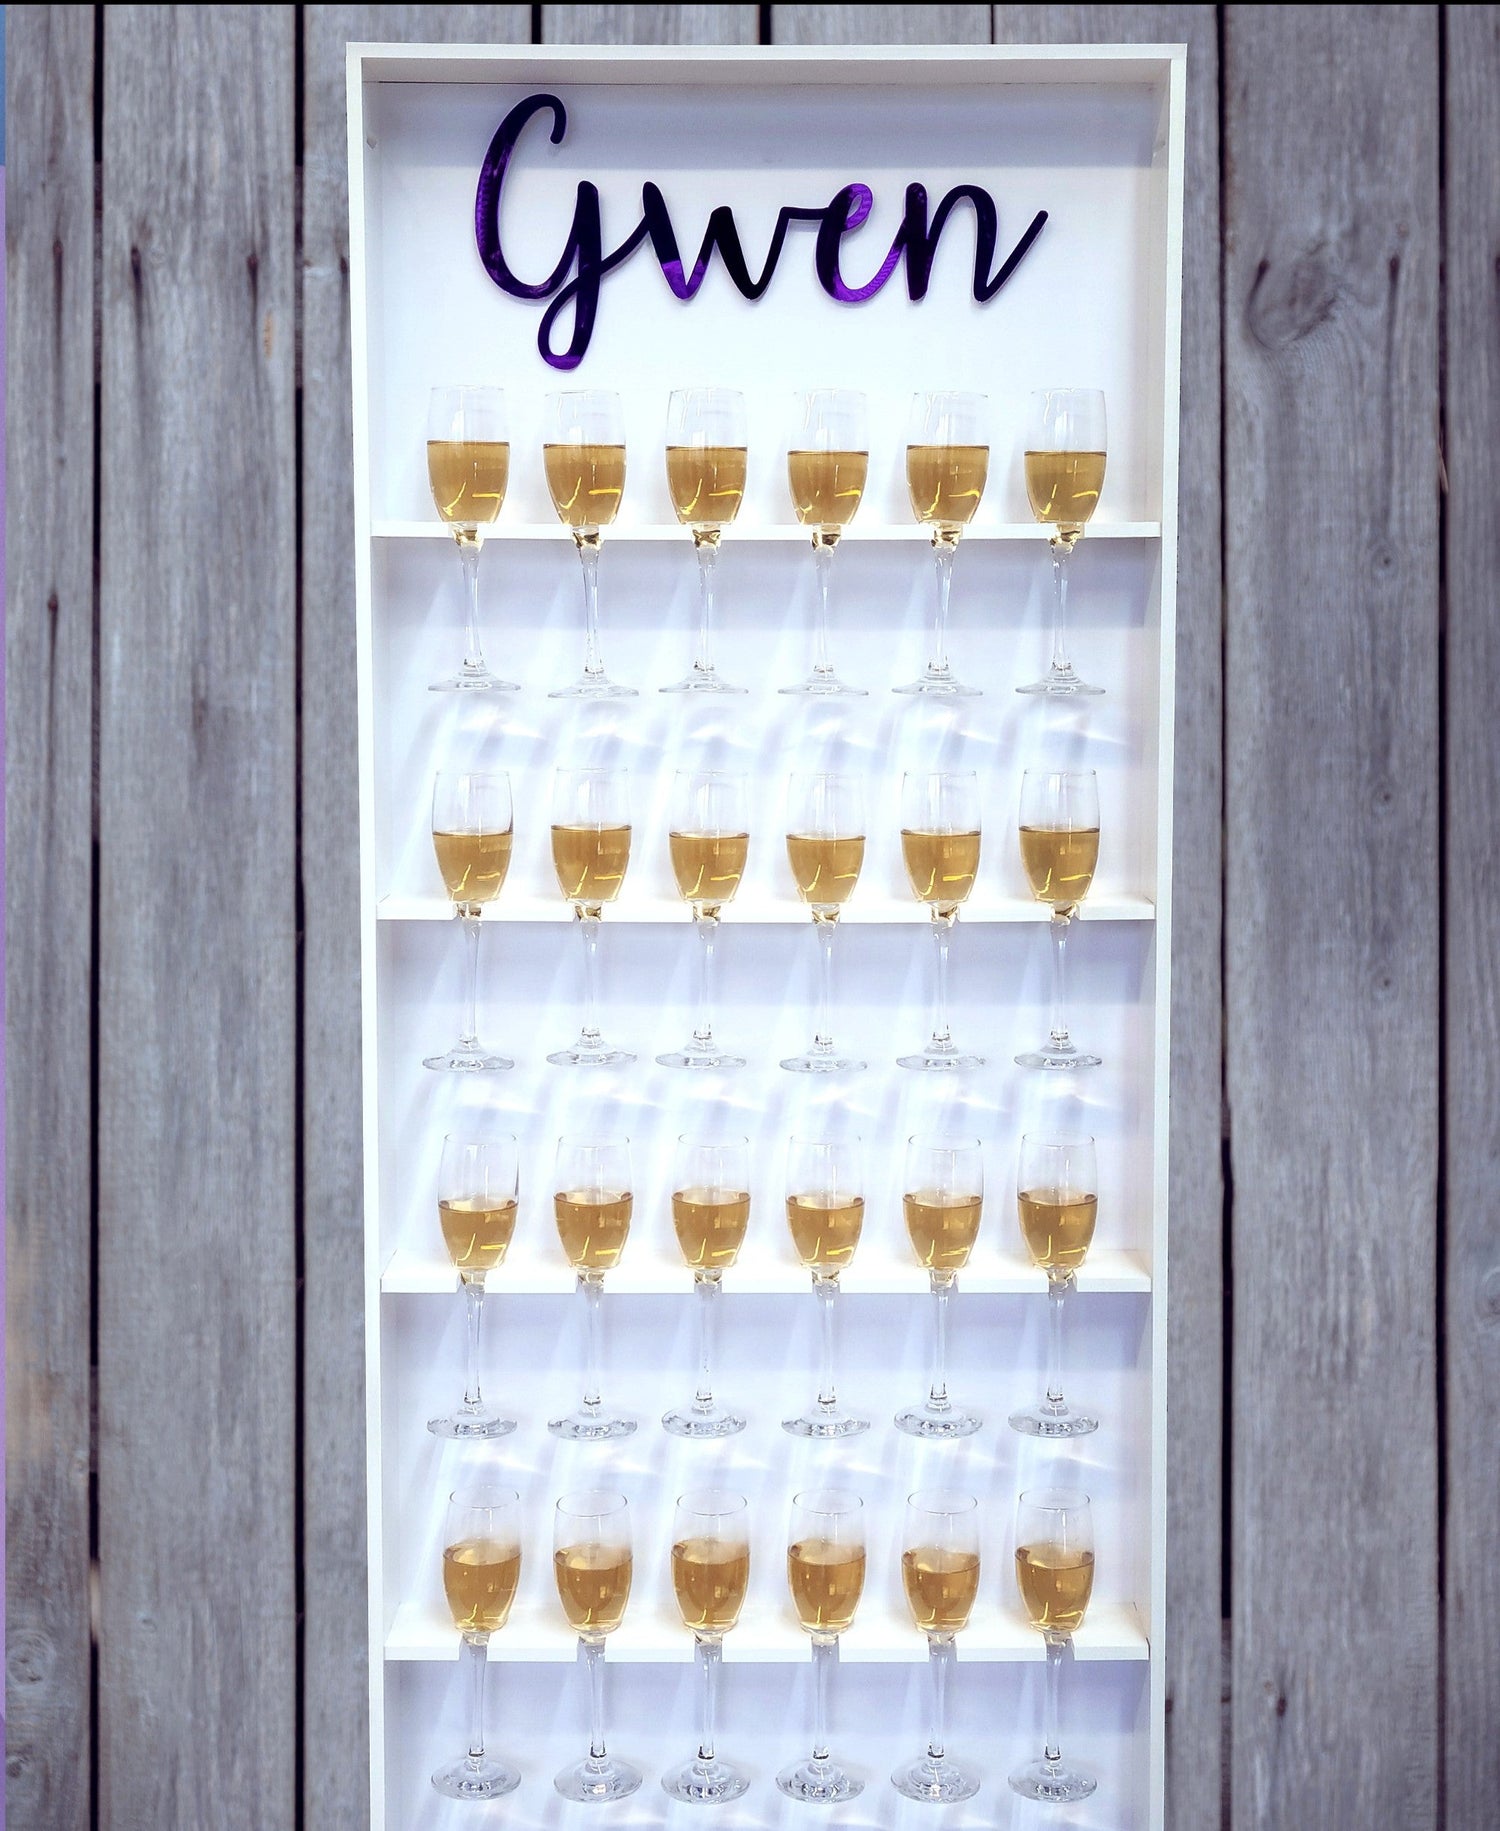 Champagne Wall, Champagne Display, Champagne Flute Holder, Drink Dispenser, Party Decor, Wedding Decor, Event Decor, Graduation Party, Corporate Event, Champagne Wall Indoor & Outdoor Use, Durable PVC Champagne Wall, Easy Assembly Champagne Wall,